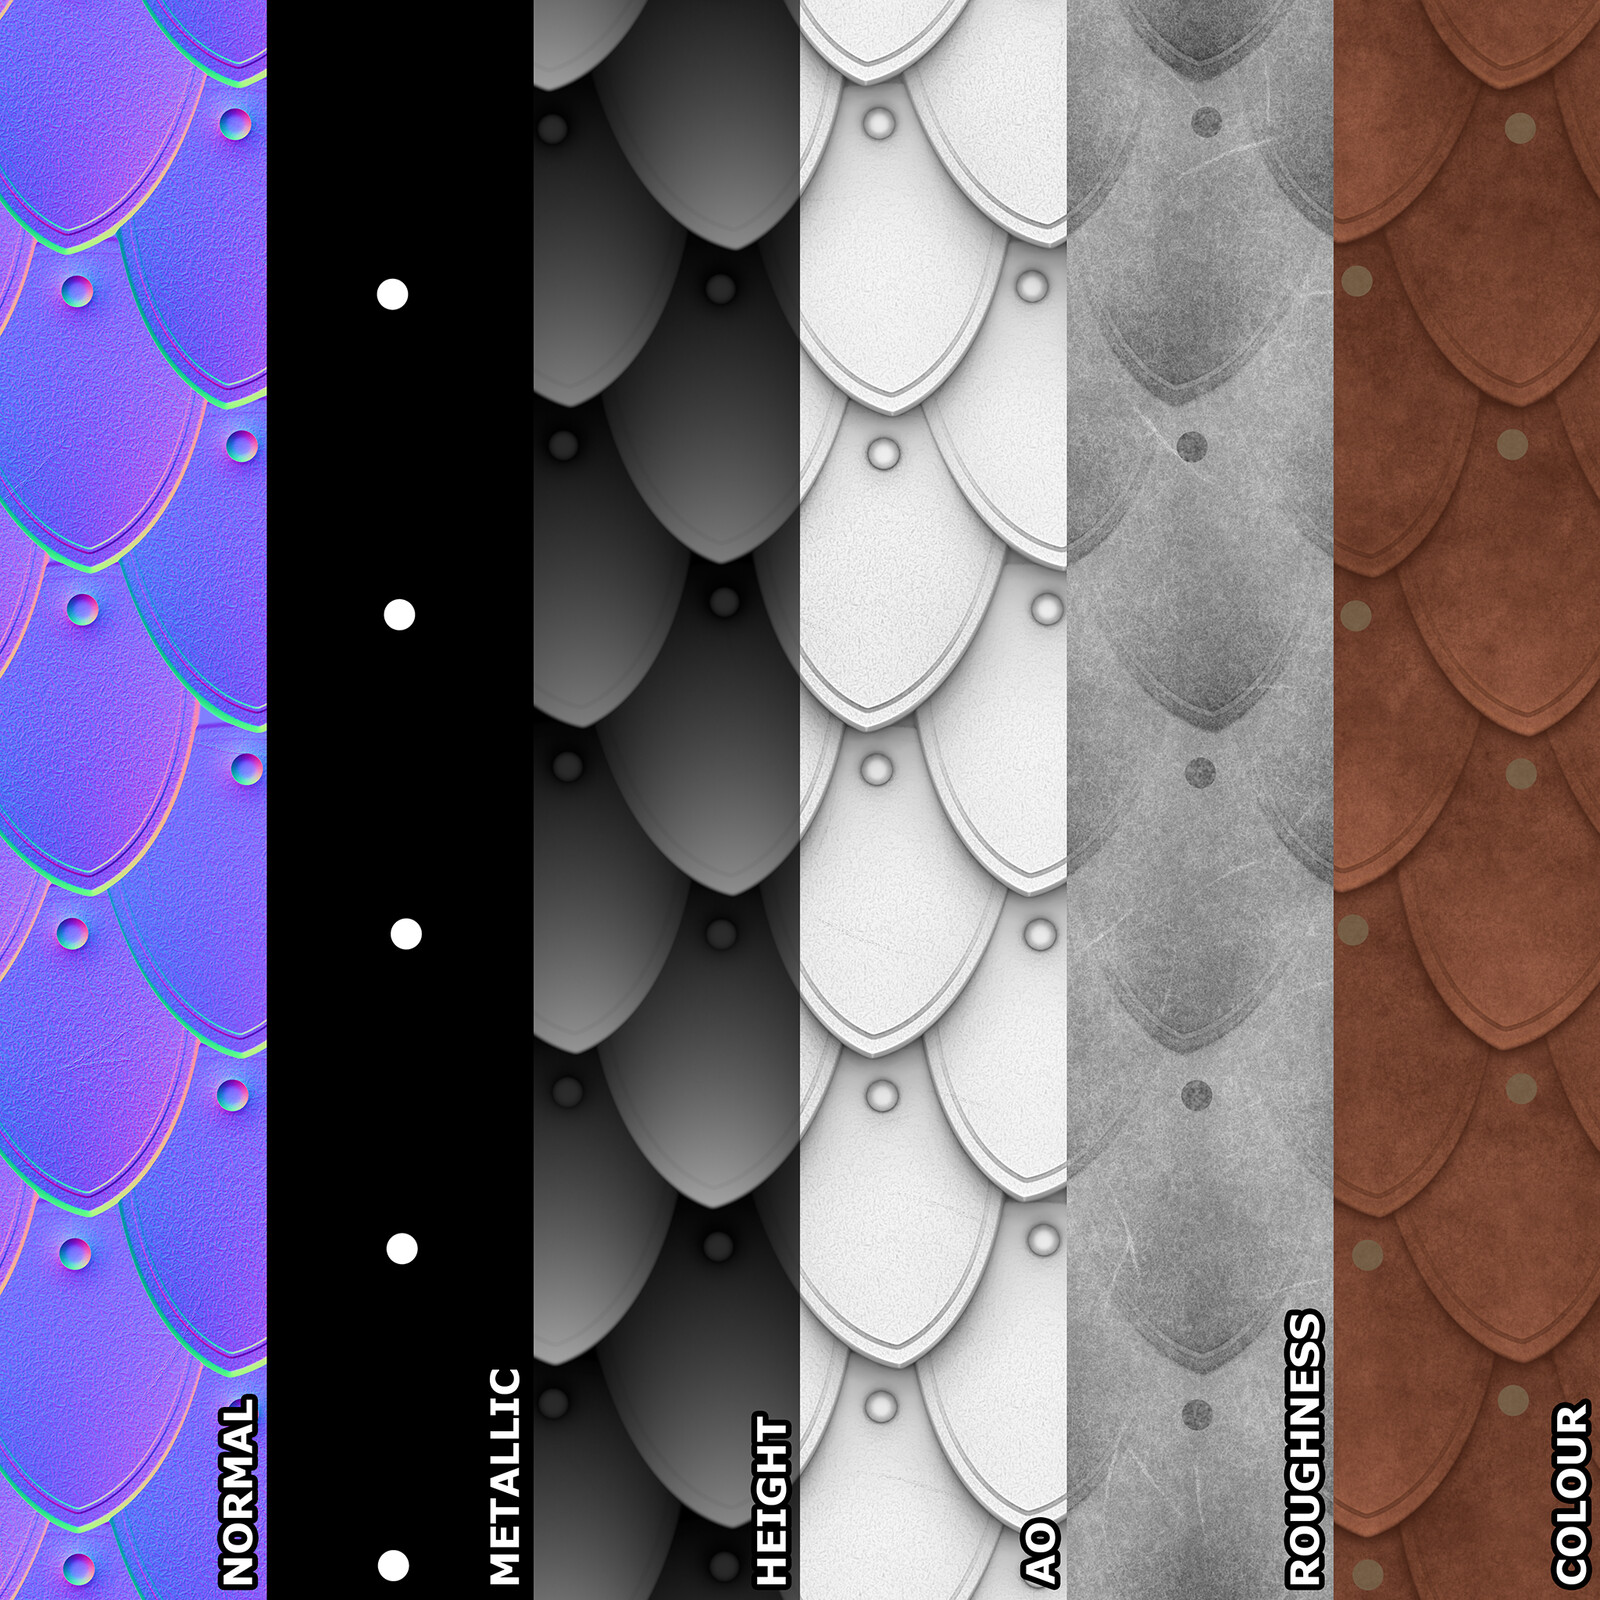 Leather Scales Material Breakdown